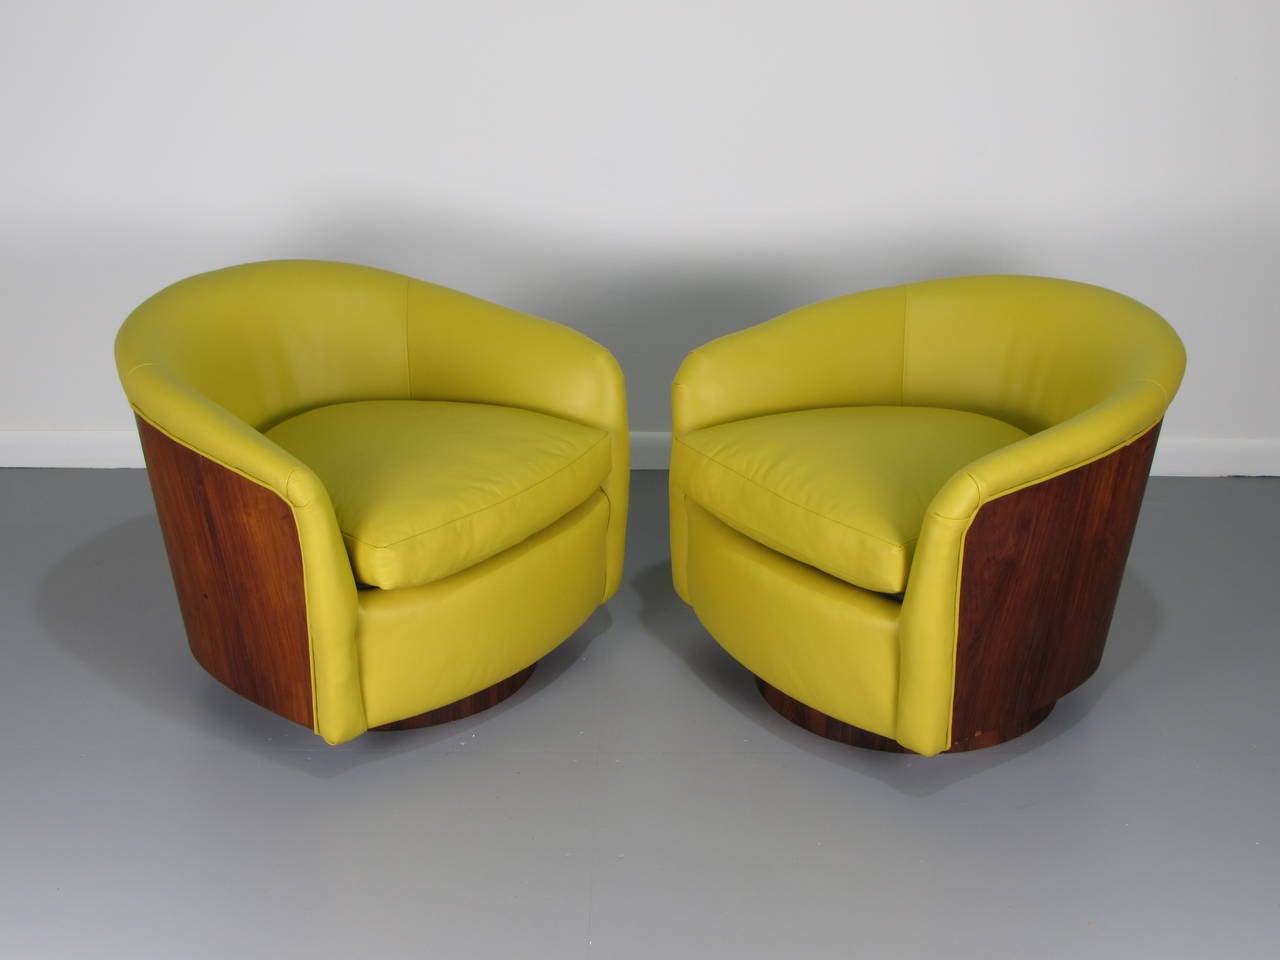 American Rare Rosewood Wrapped Swivel Tub Chairs in Leather by Milo Baughman, 1970s